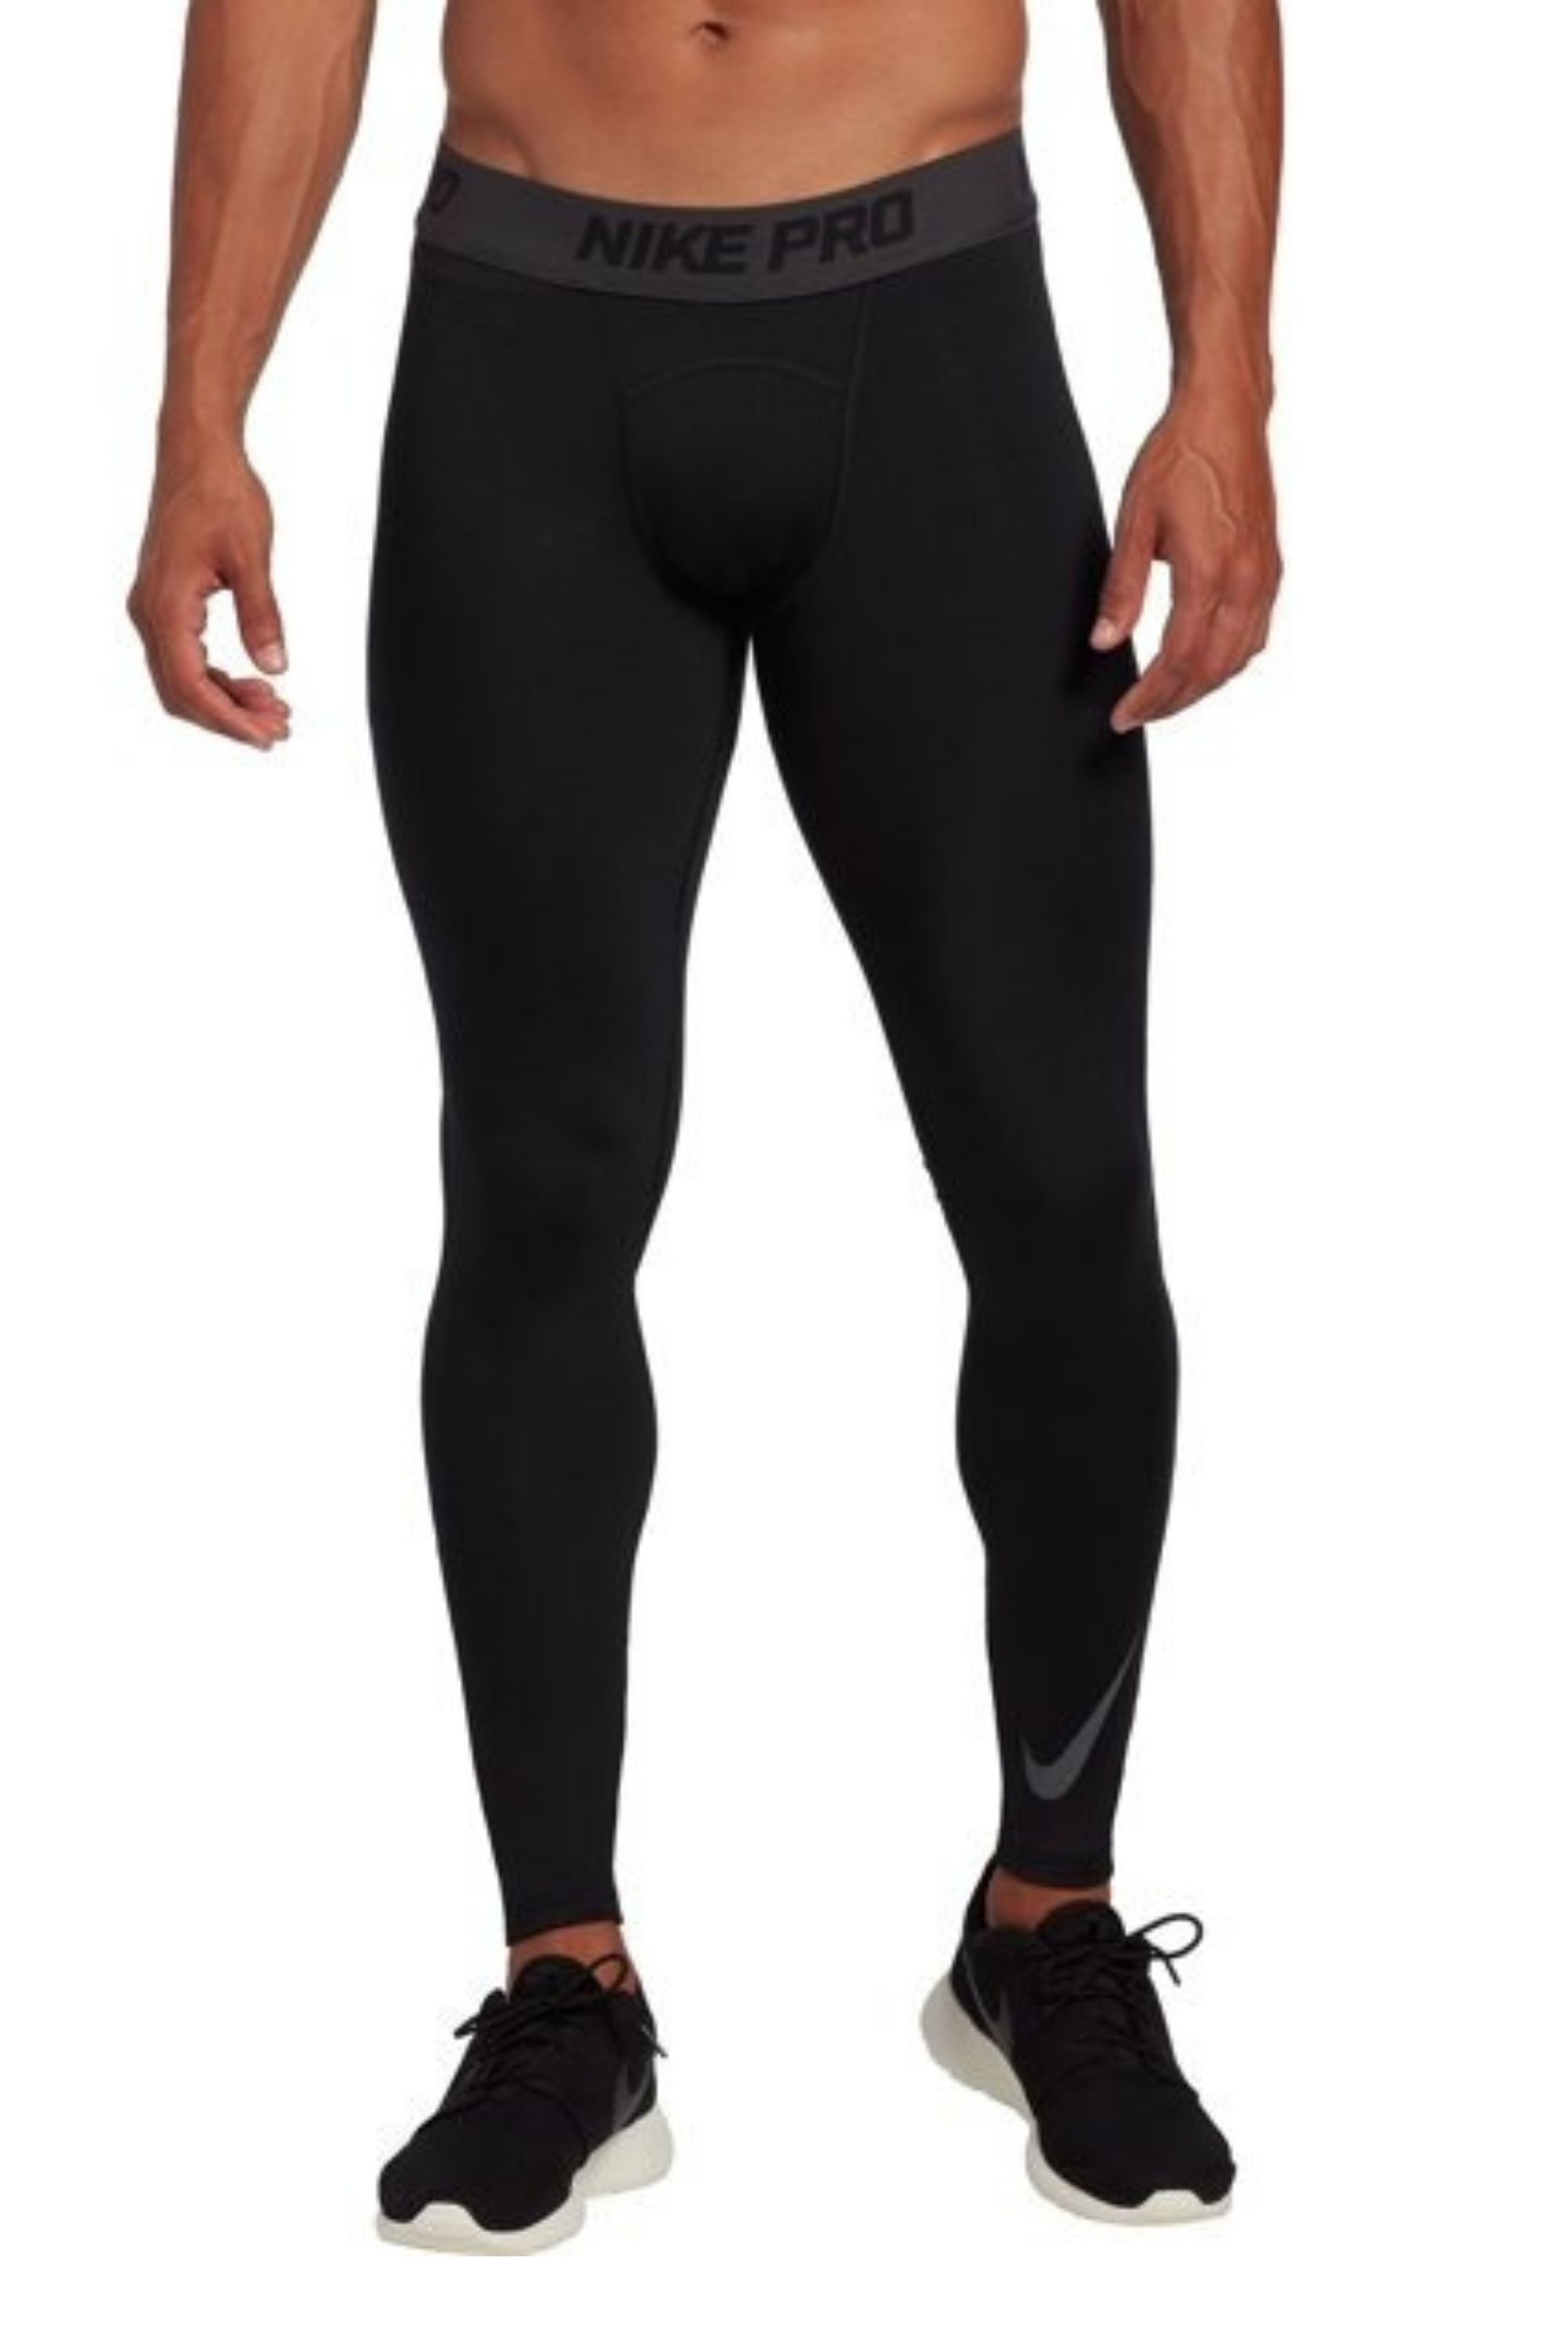 Self Pro Men's Thermal Compression Pants Athletic Sports Leggings Running Tights Cold Weather Winter Warm Base Layer Bottom